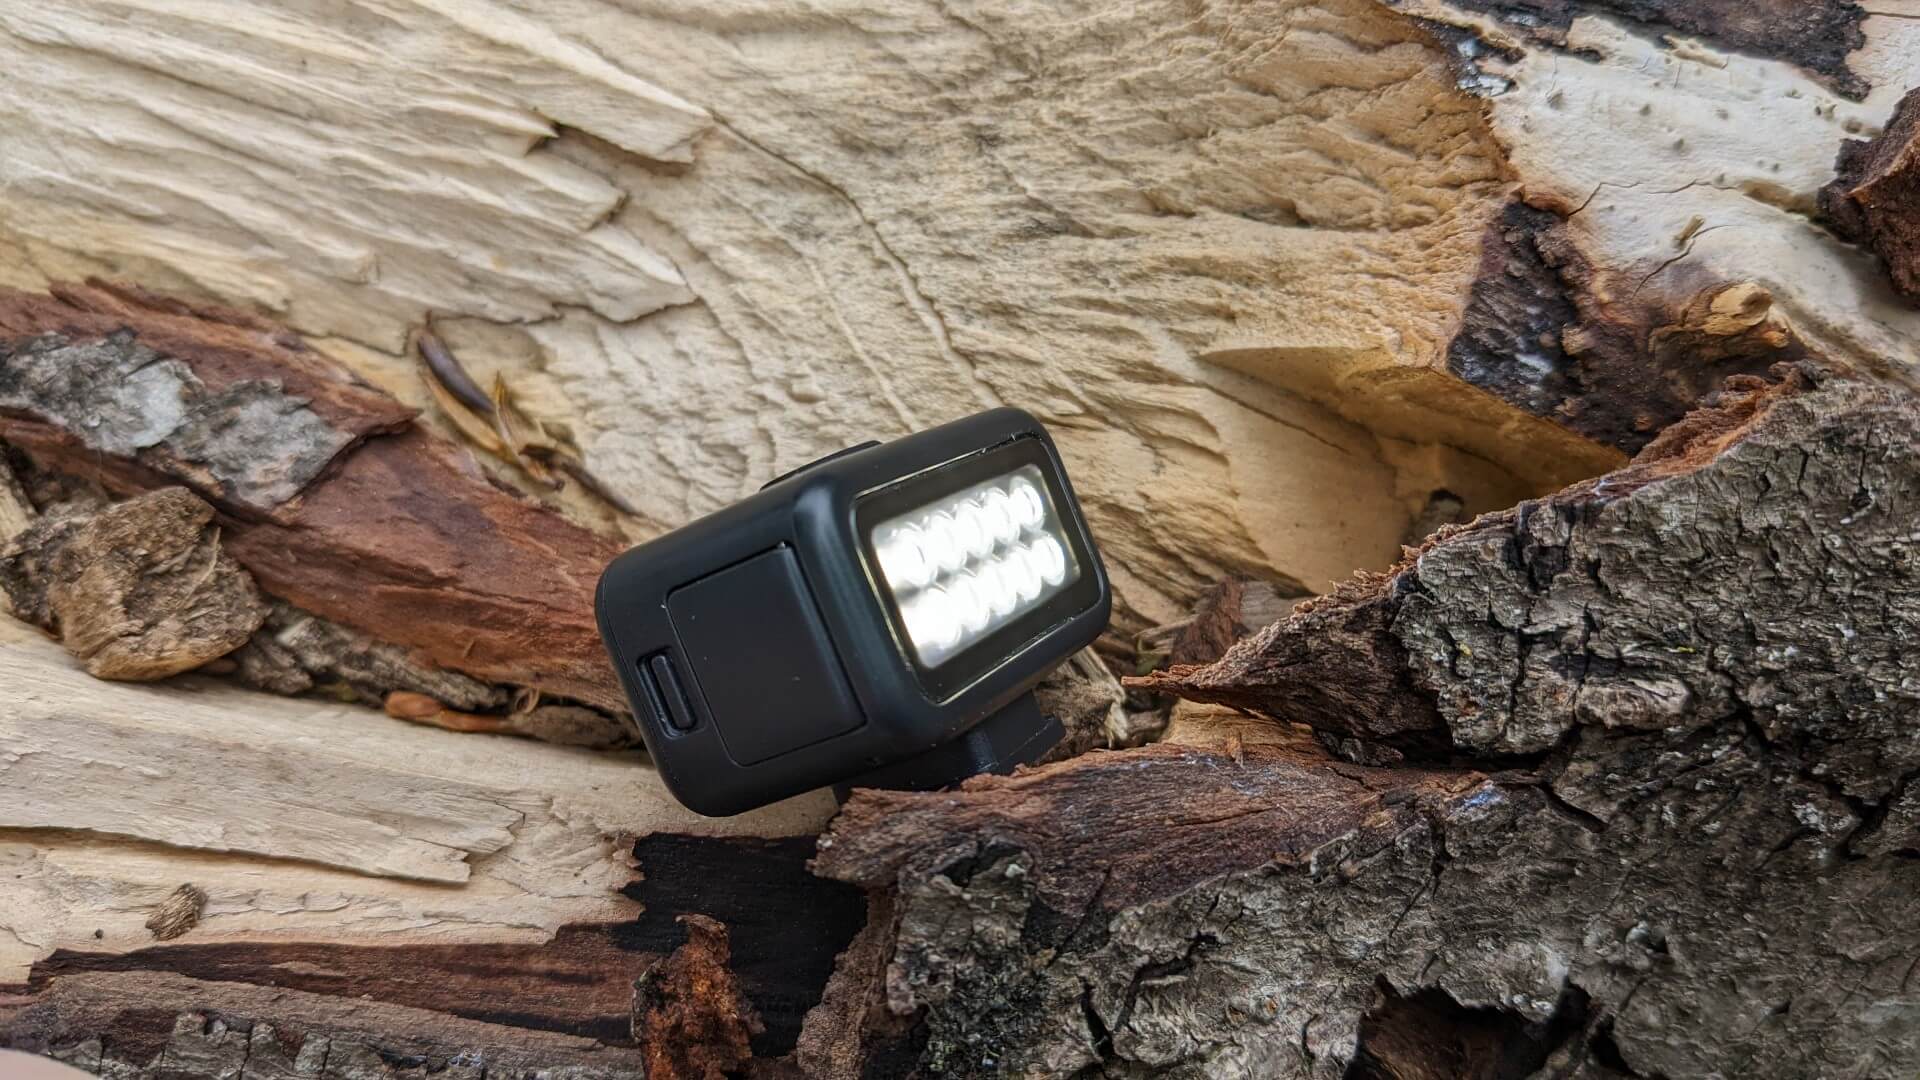 What is an Action Camera Flashlight